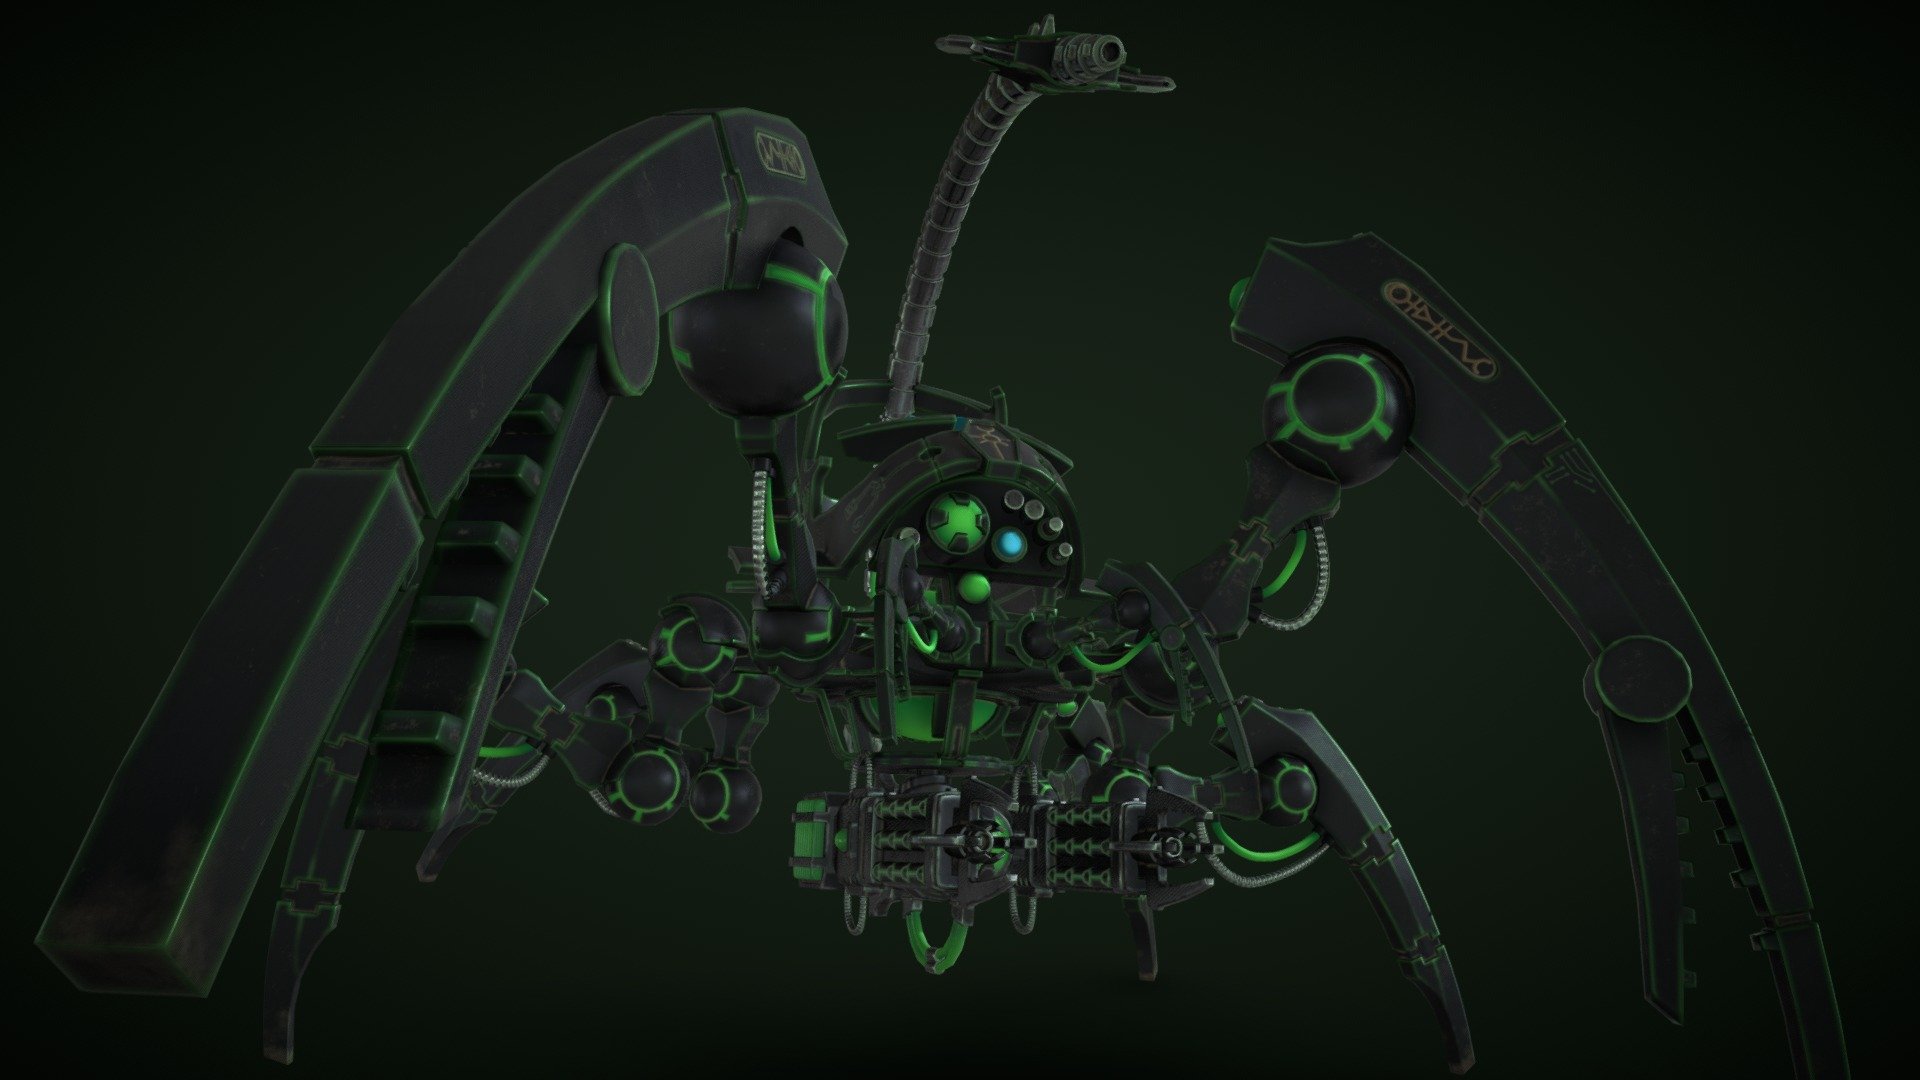 Piece made for my finla year at Uni. Based on the Necron Triarch Stalker from the Warhammer 40,000 universe. There are in-engine images on Artstation 3d model